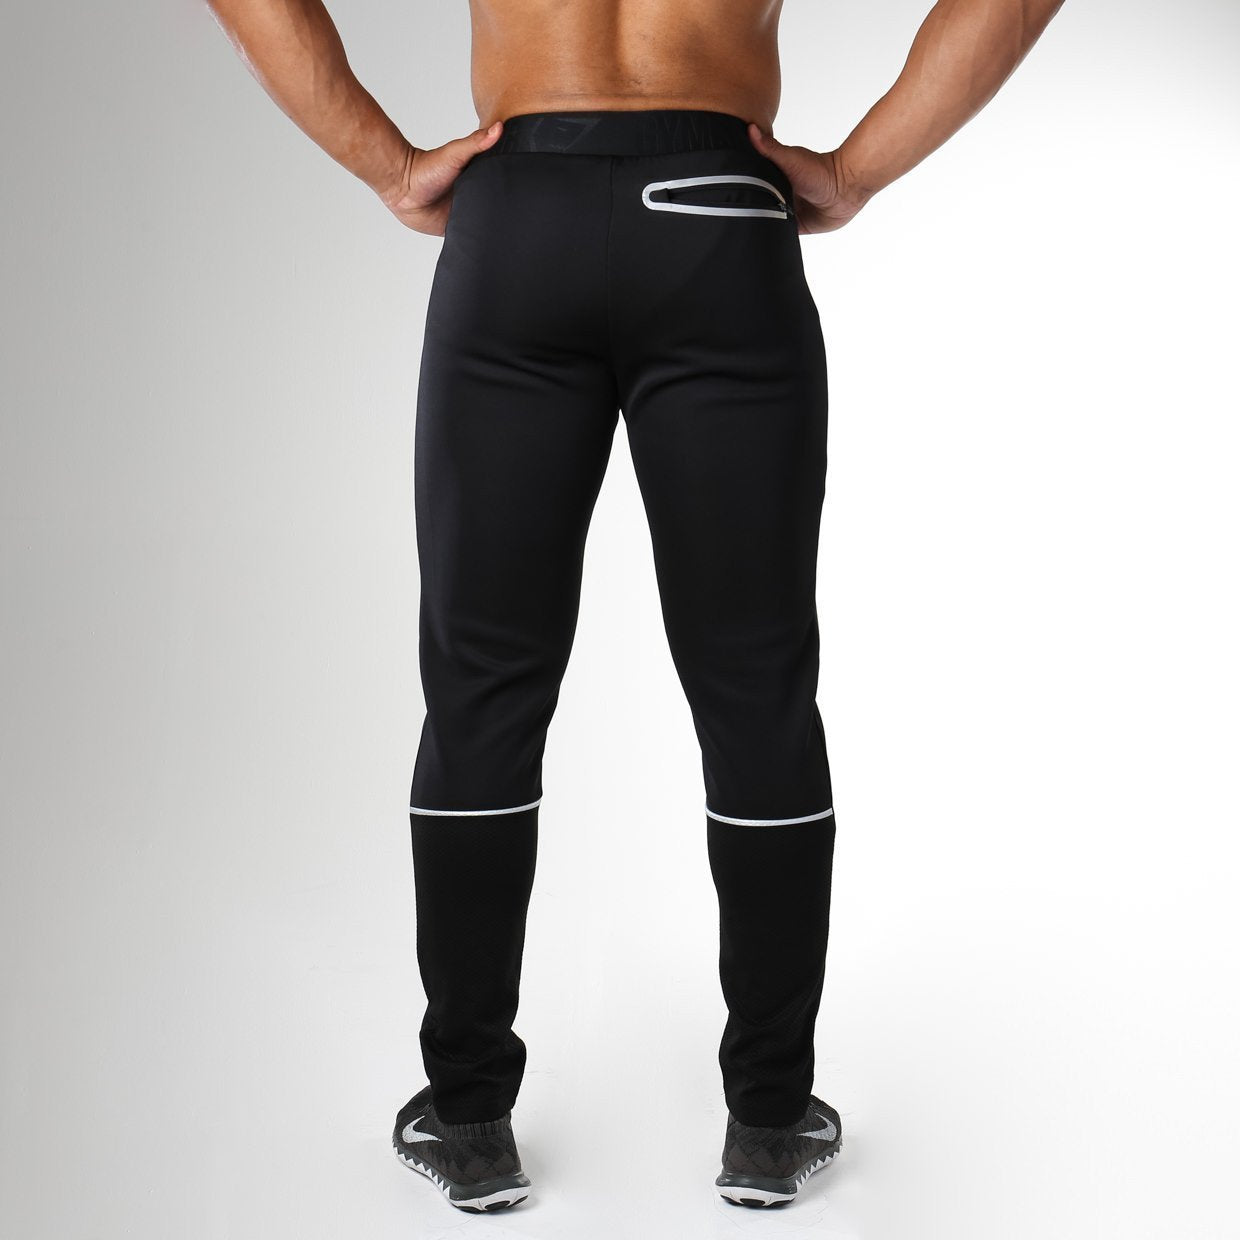 Lunar Reflective Tapered Bottoms in Black - view 2